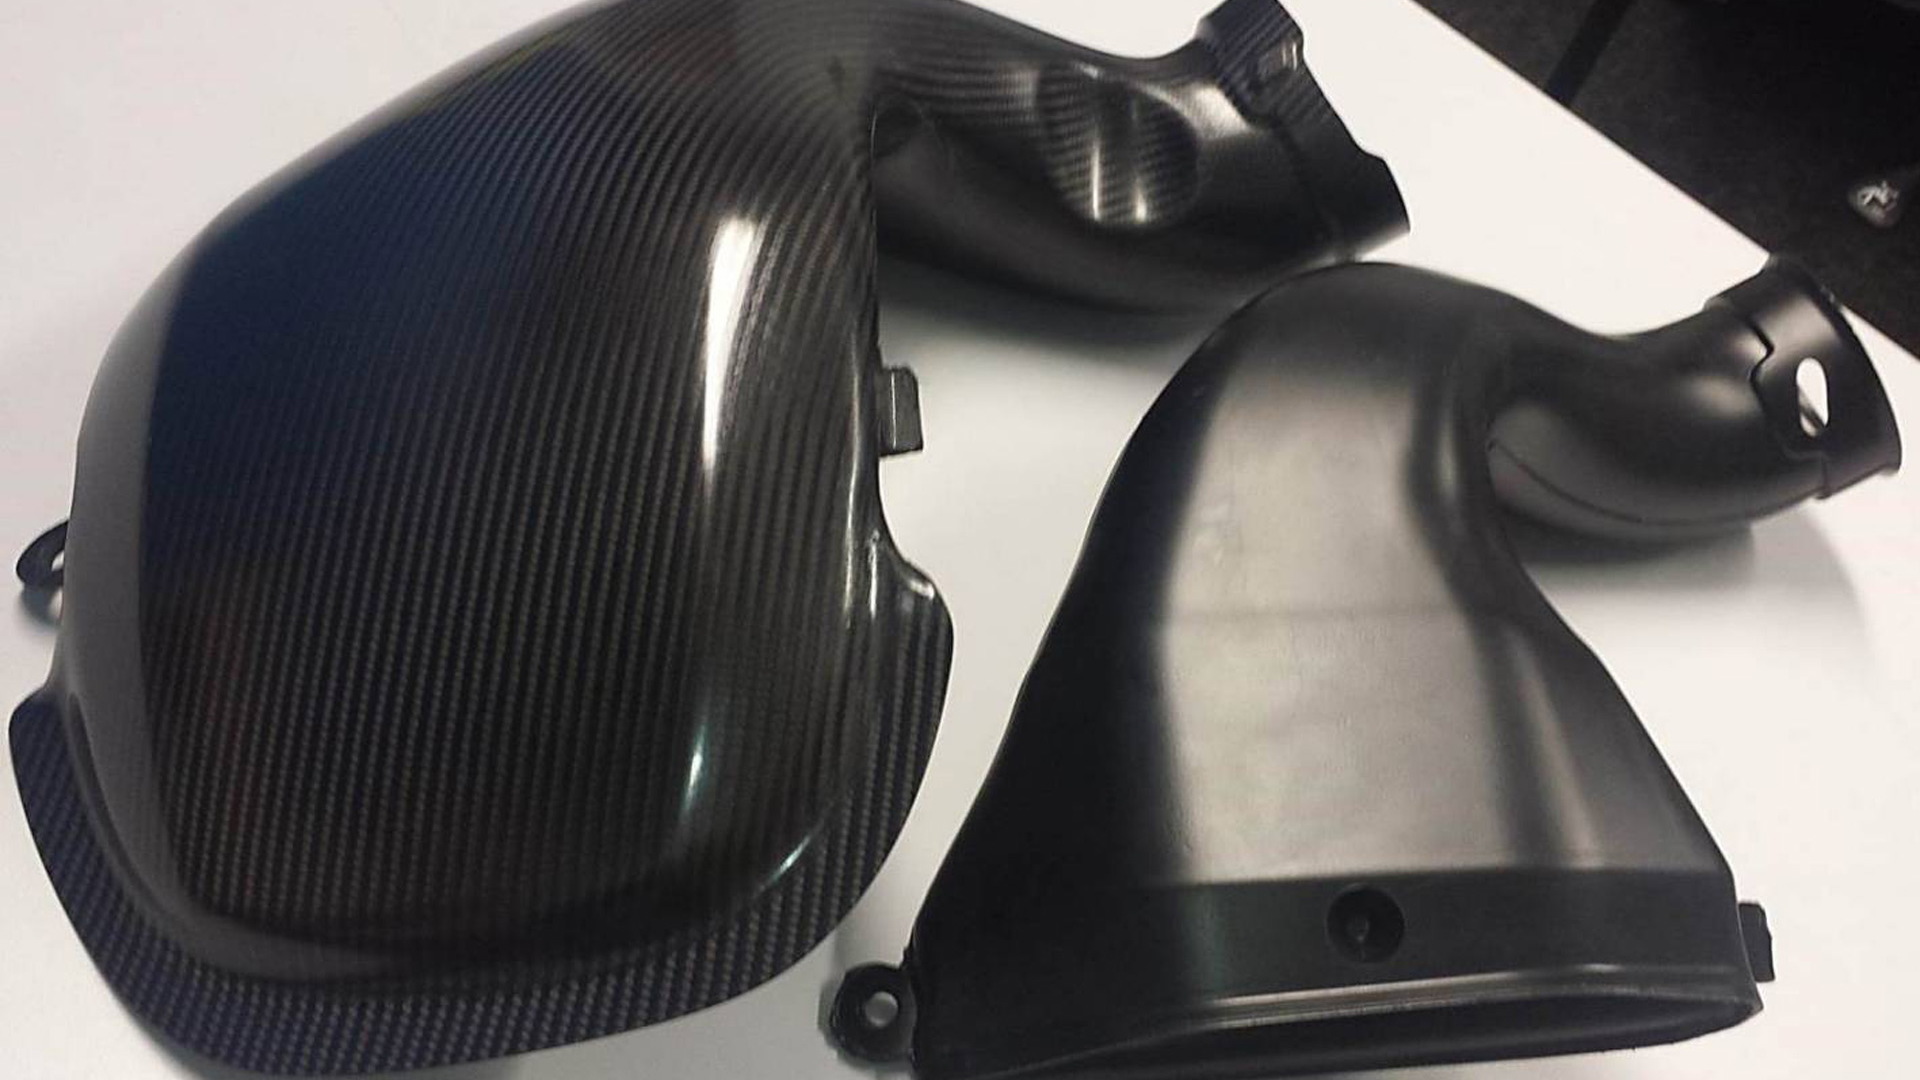 Carbon fiber air intake from the 2016 Ford Falcon XR6 Sprint